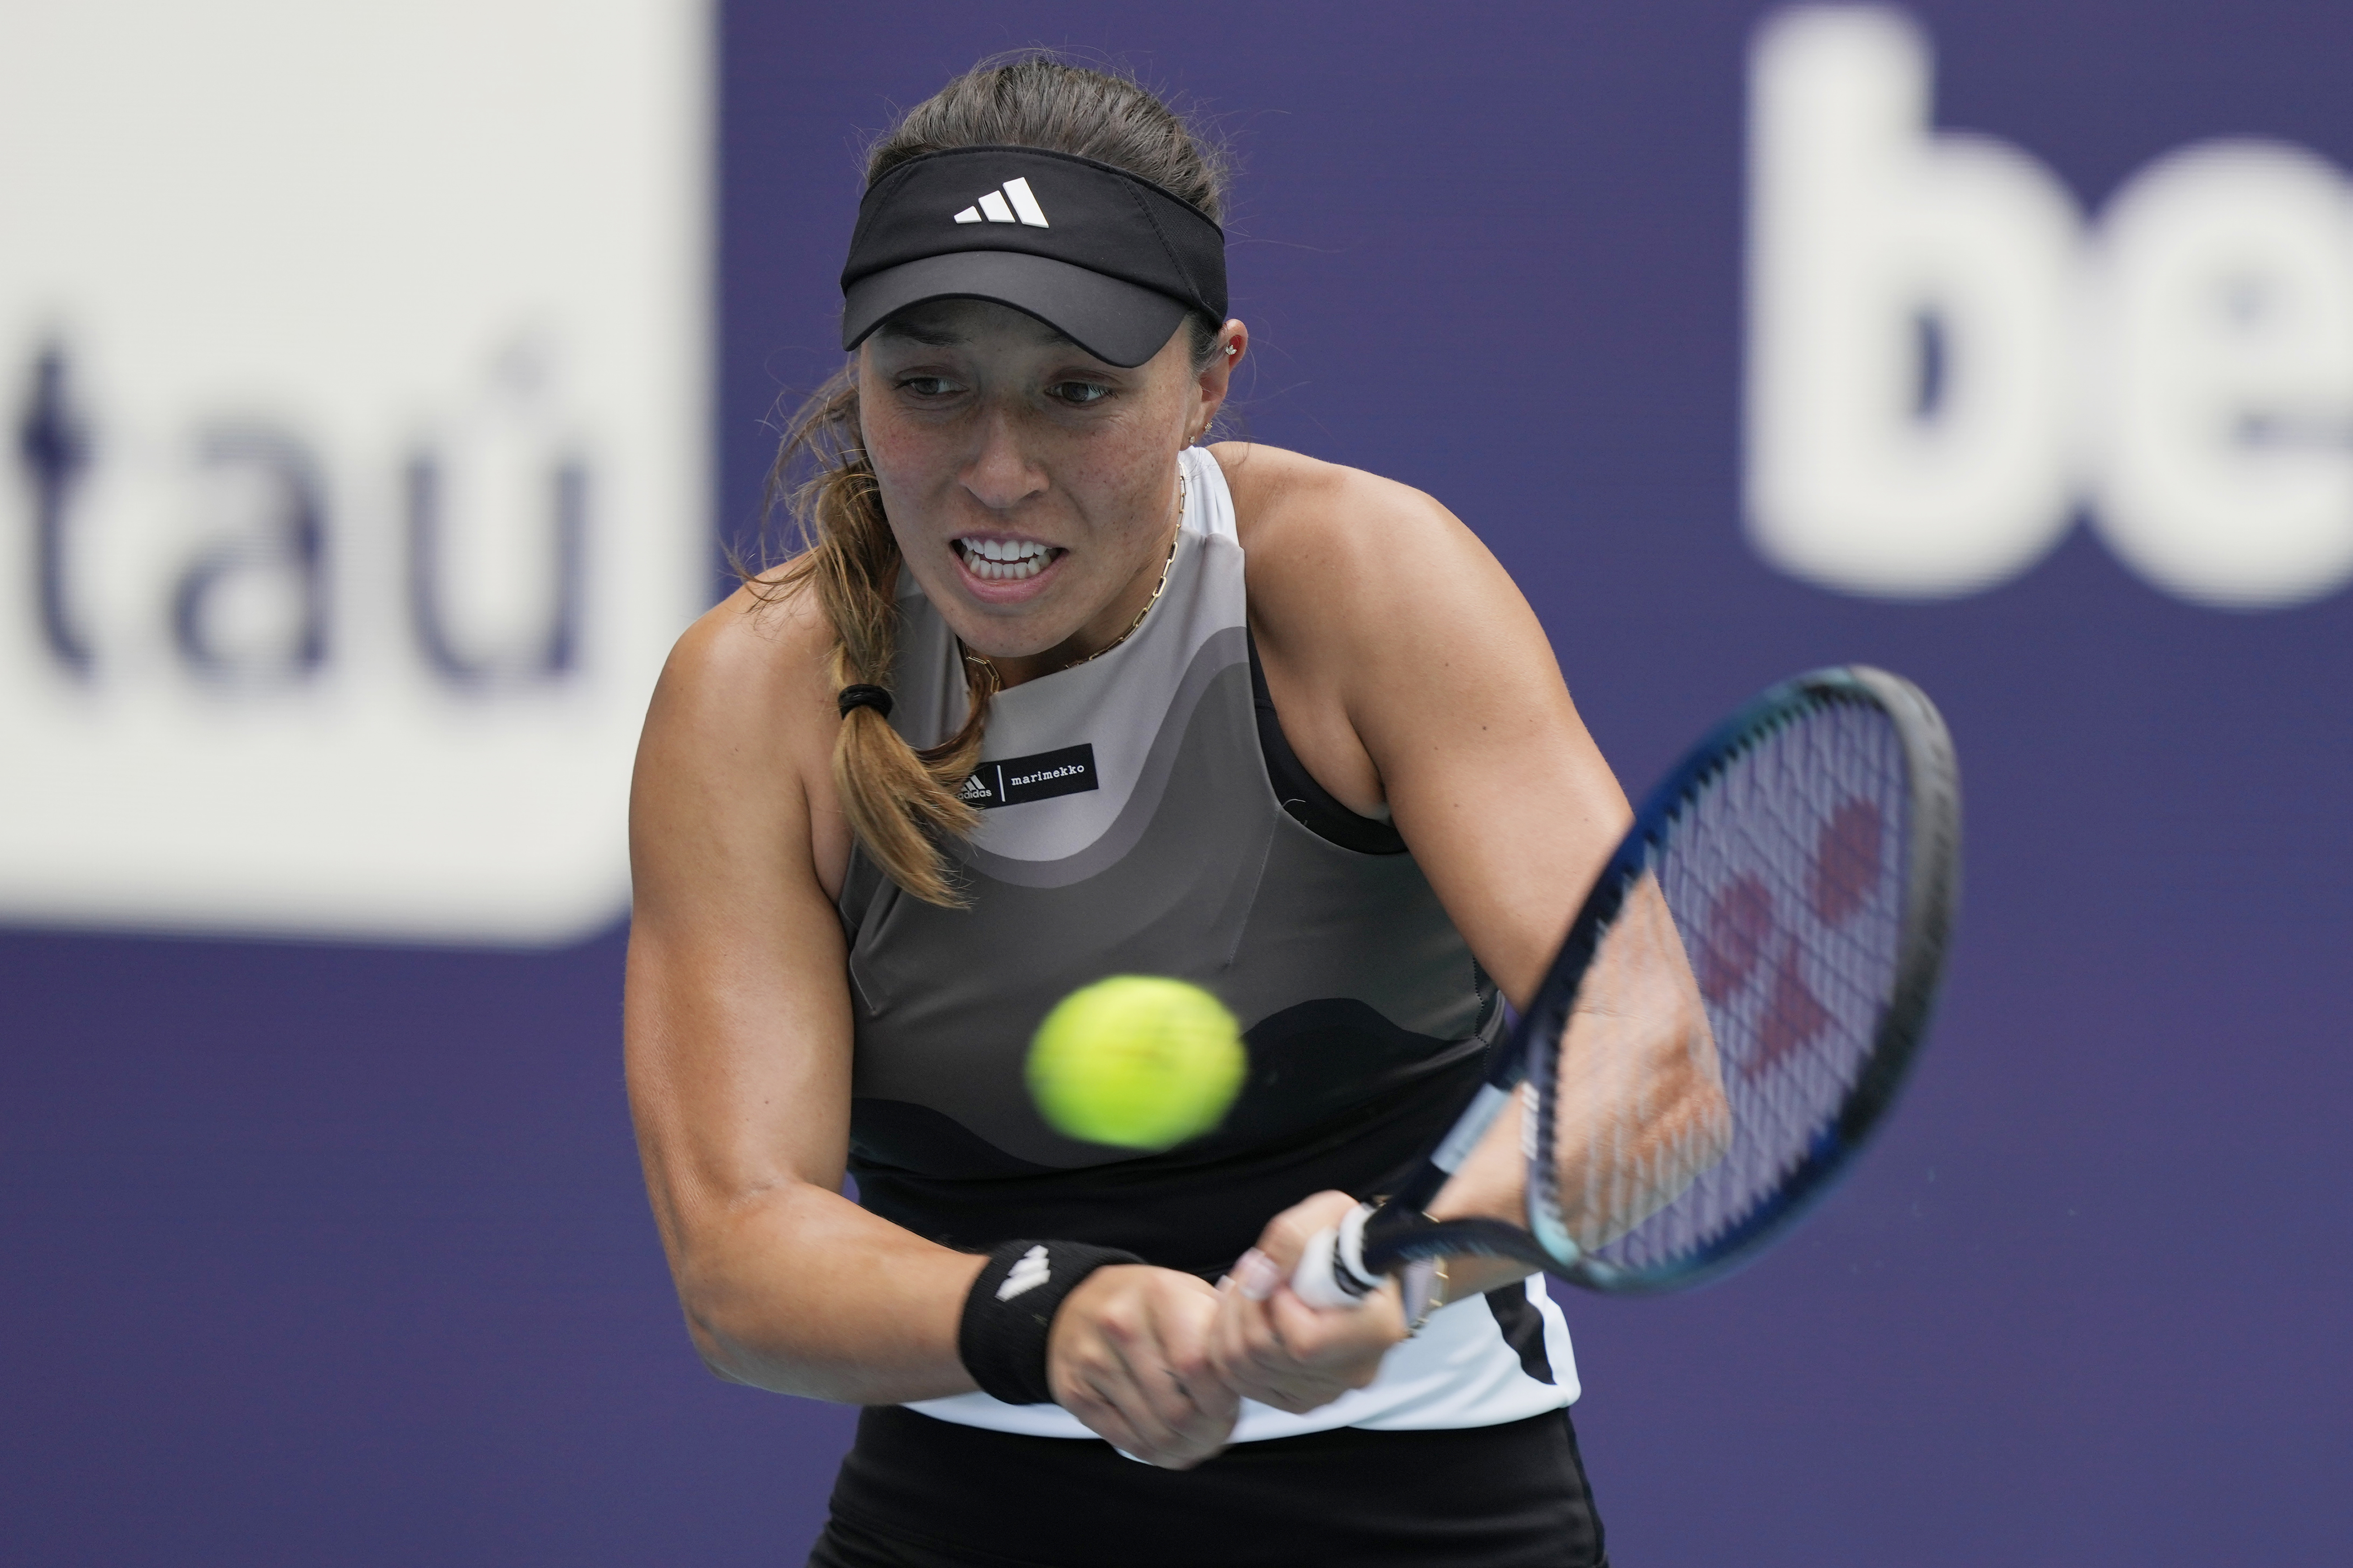 How to watch Miami Open 2023 WTA quarterfinals Time, TV channel, free live stream